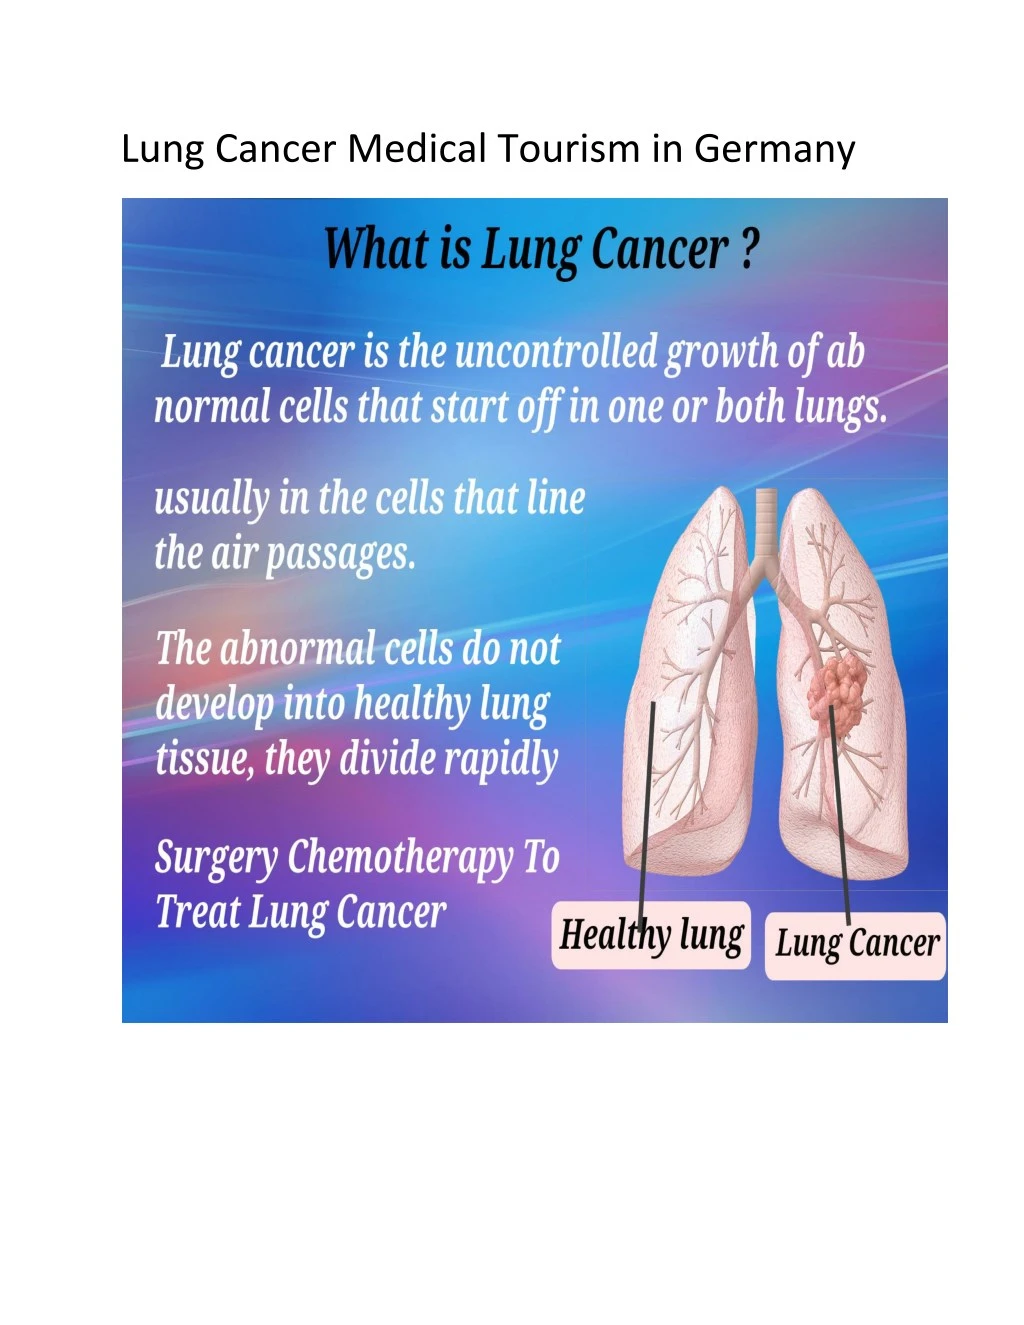 lung cancer medical tourism in germany